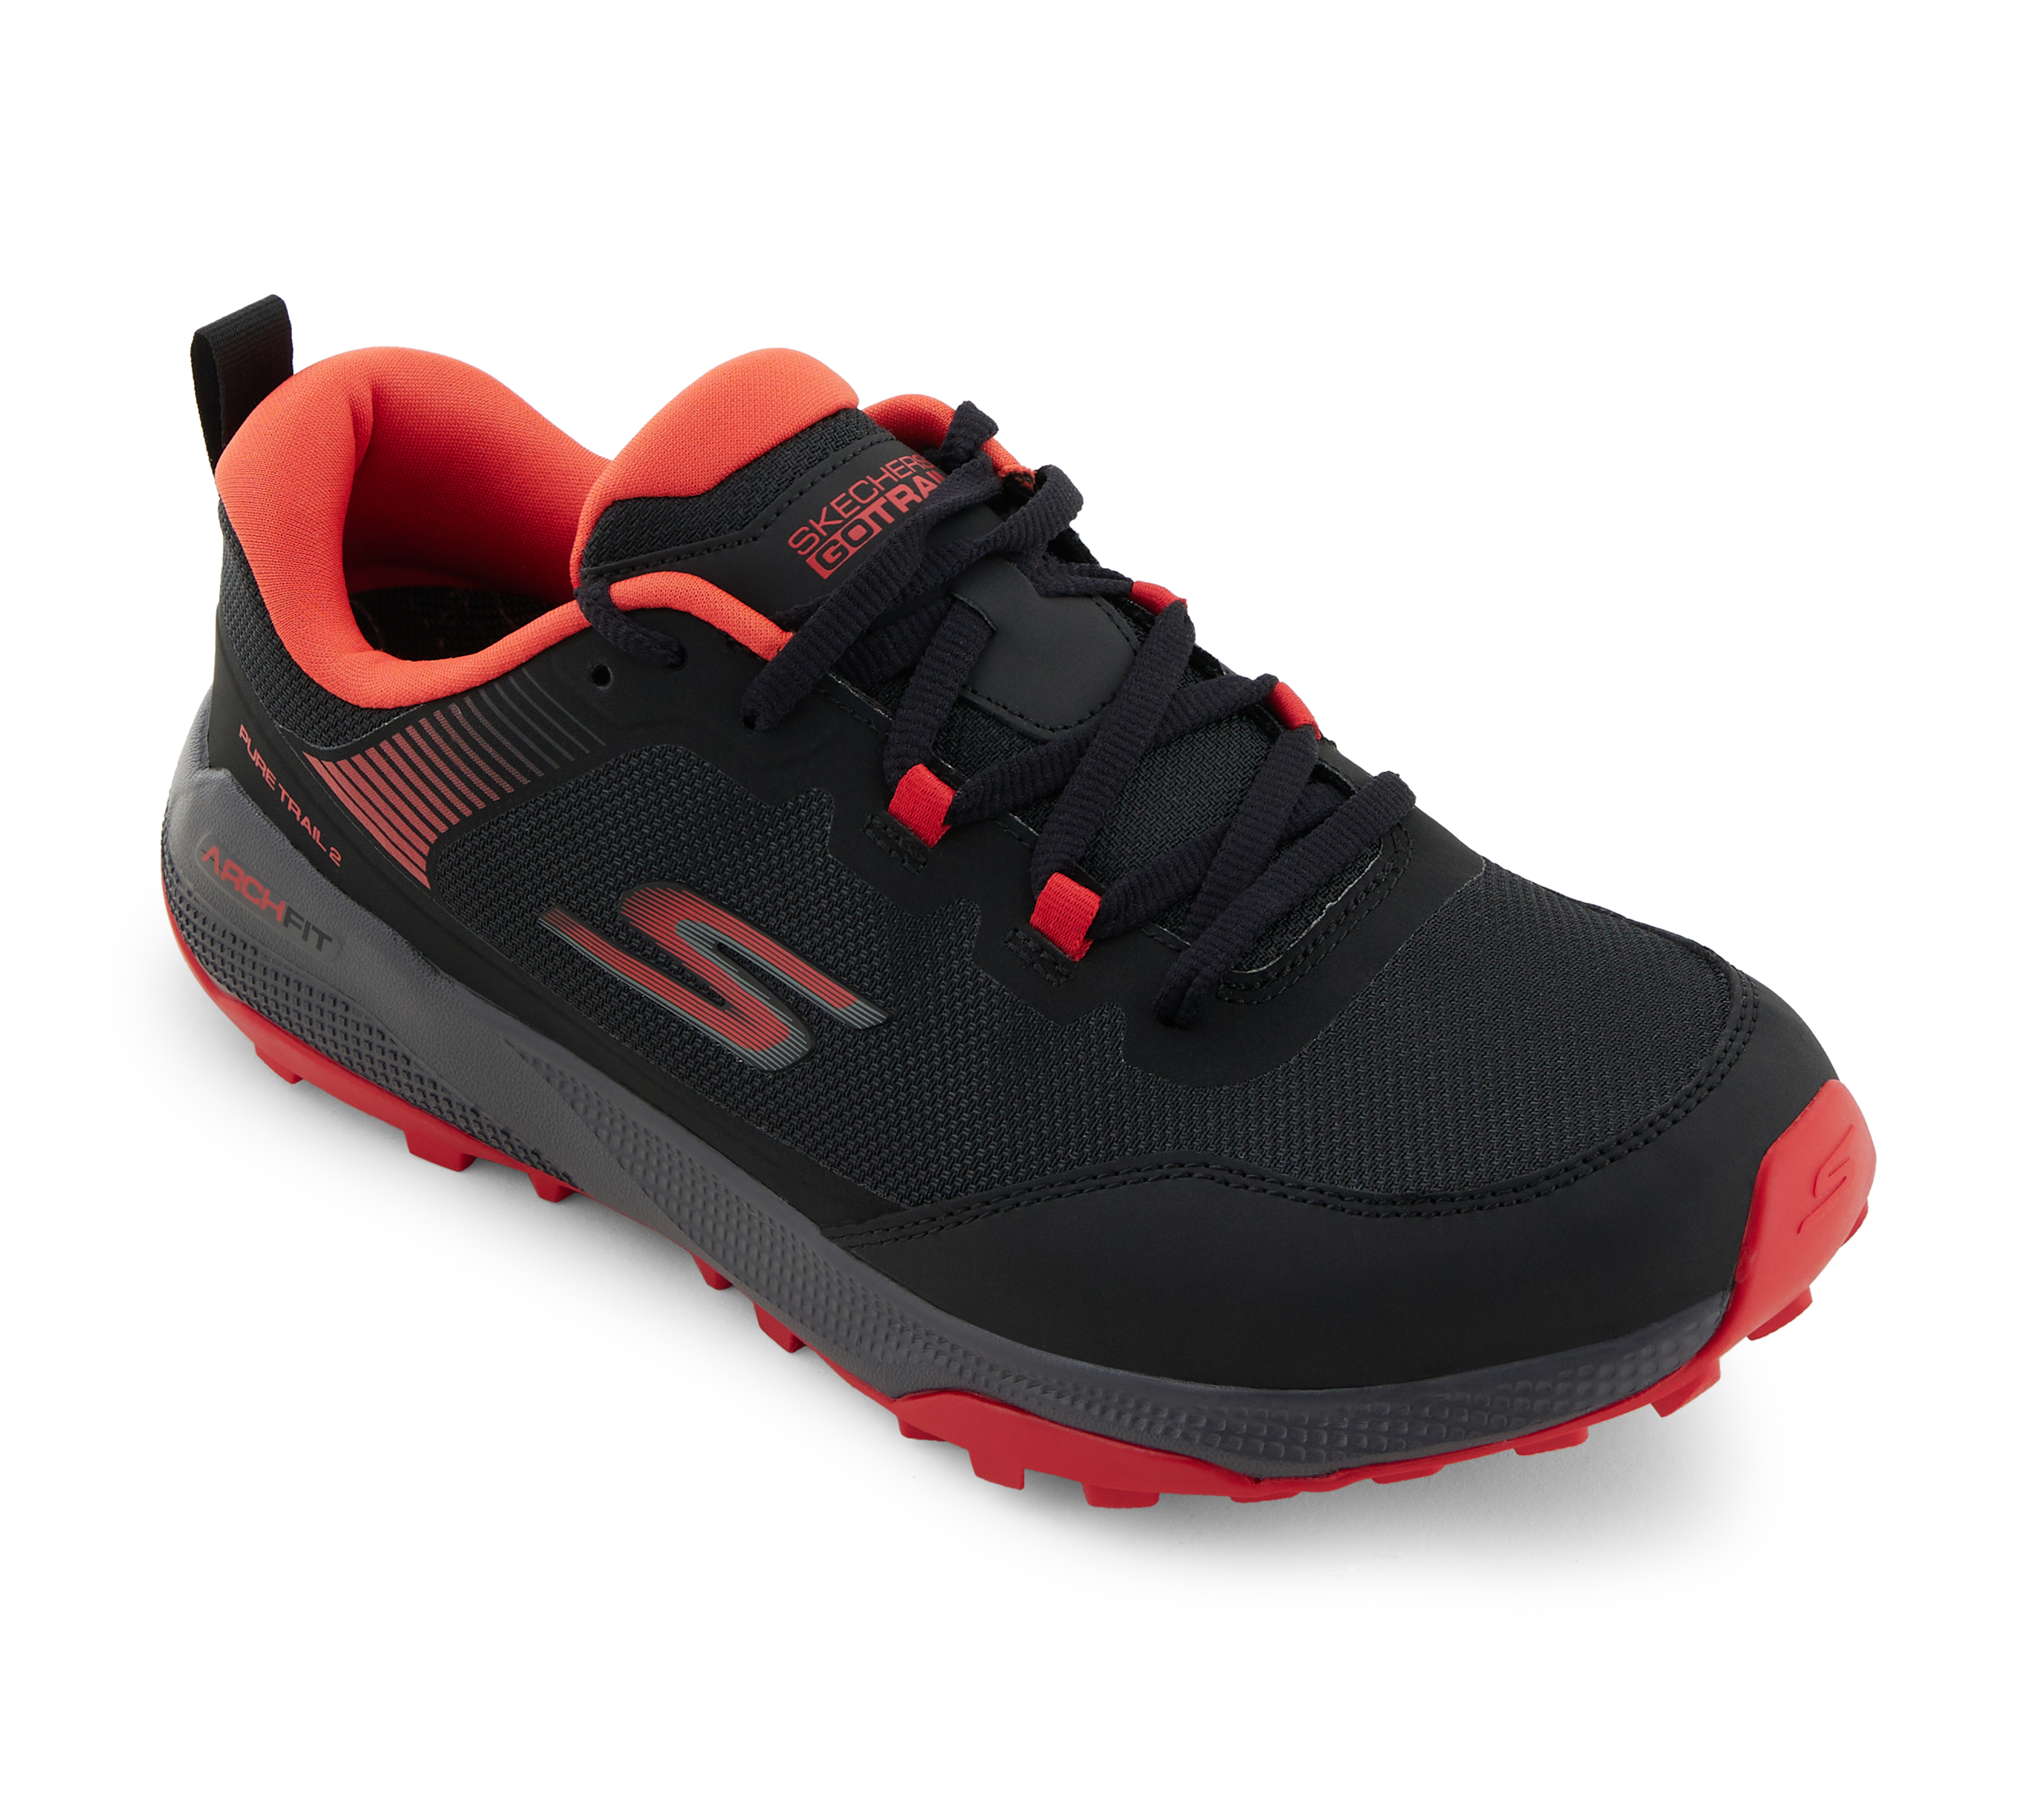 GO RUN PURE TRAIL 2 - VALLEY, BLACK/RED Footwear Lateral View